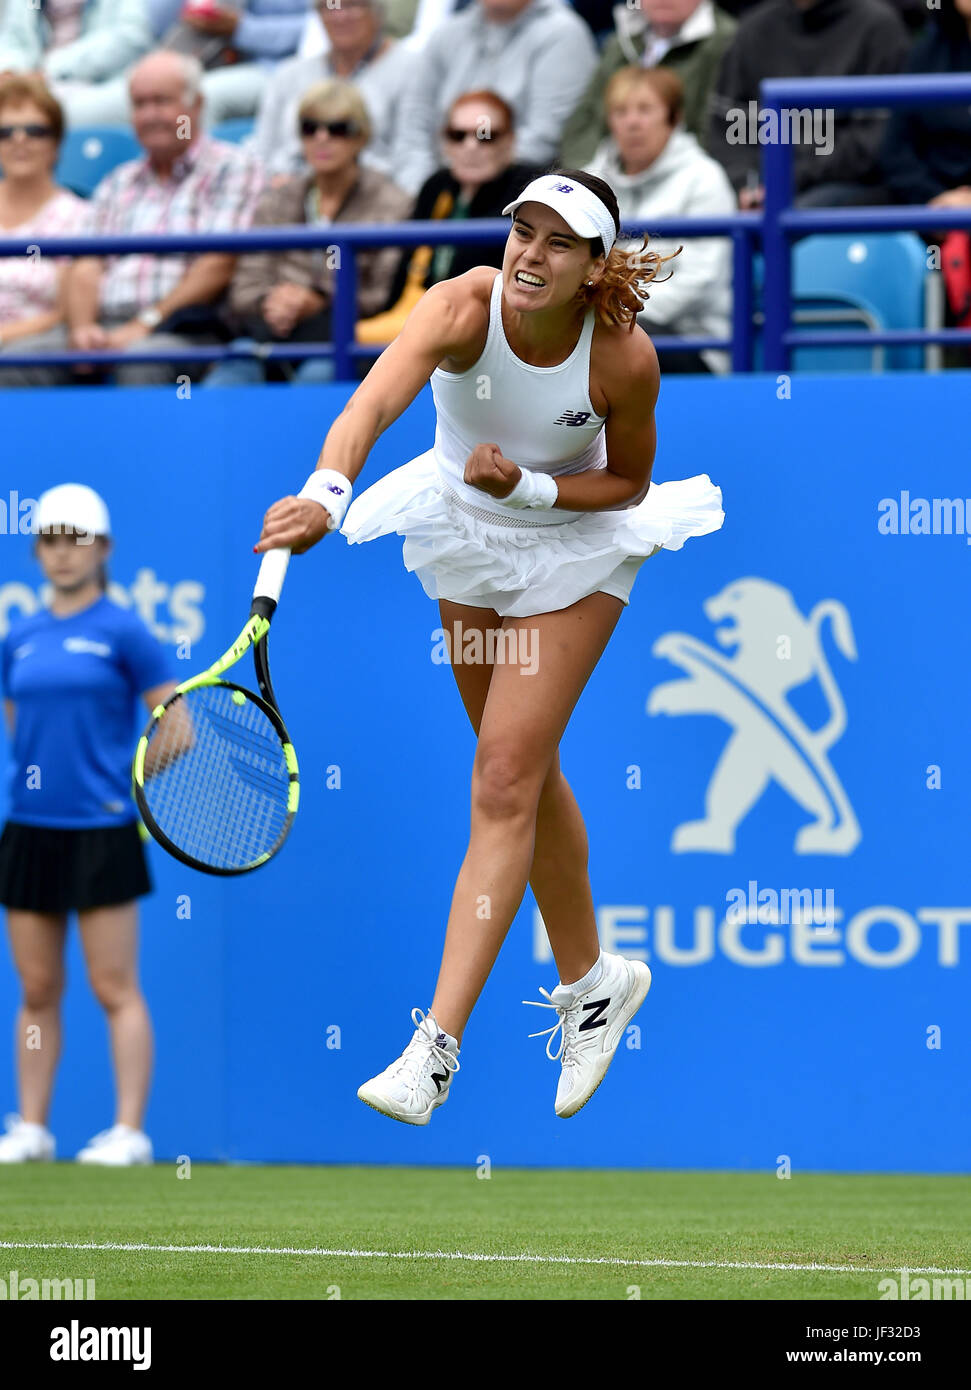 Sorana Cirstea of Romania in action at the Aegon International Eastbourne tennis tournament at Devonshire Park , Eastbourne Sussex UK . 28 Jun 2017 Stock Photo